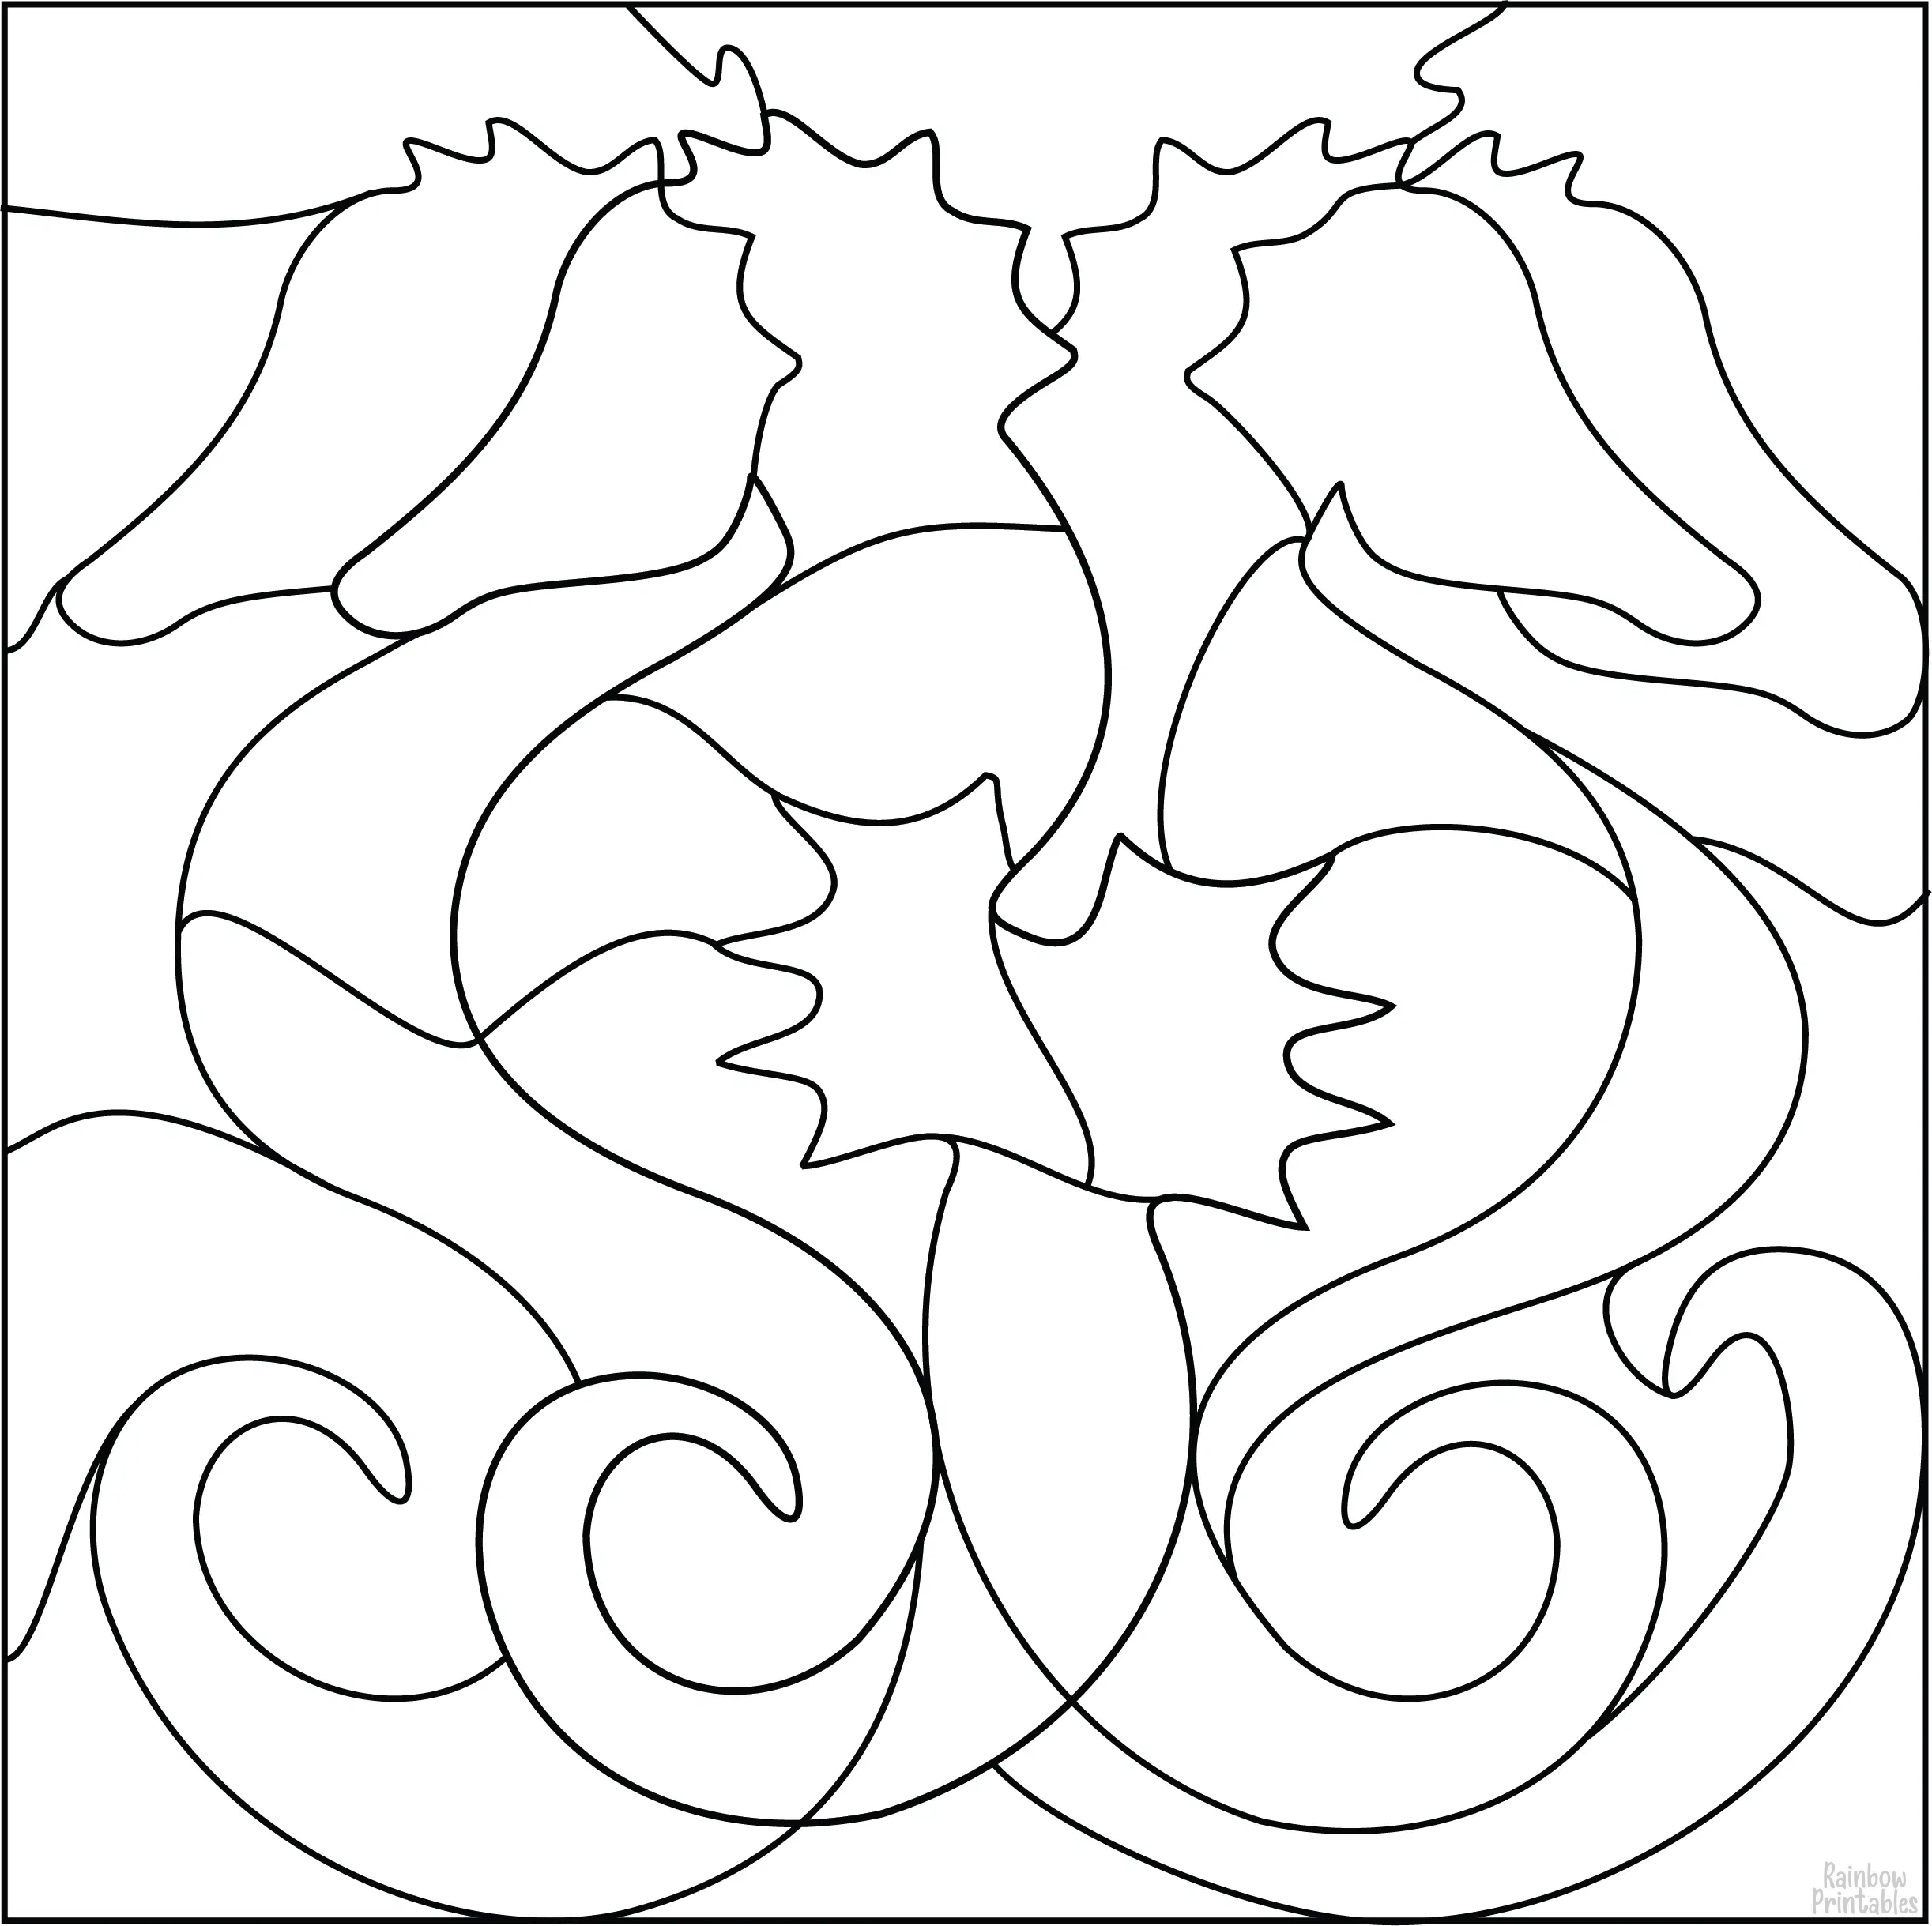 FREE SEAHORSE PUZZLE DIY GAME Free Clipart Coloring Pages for Kids Adults Art Activities Line Art